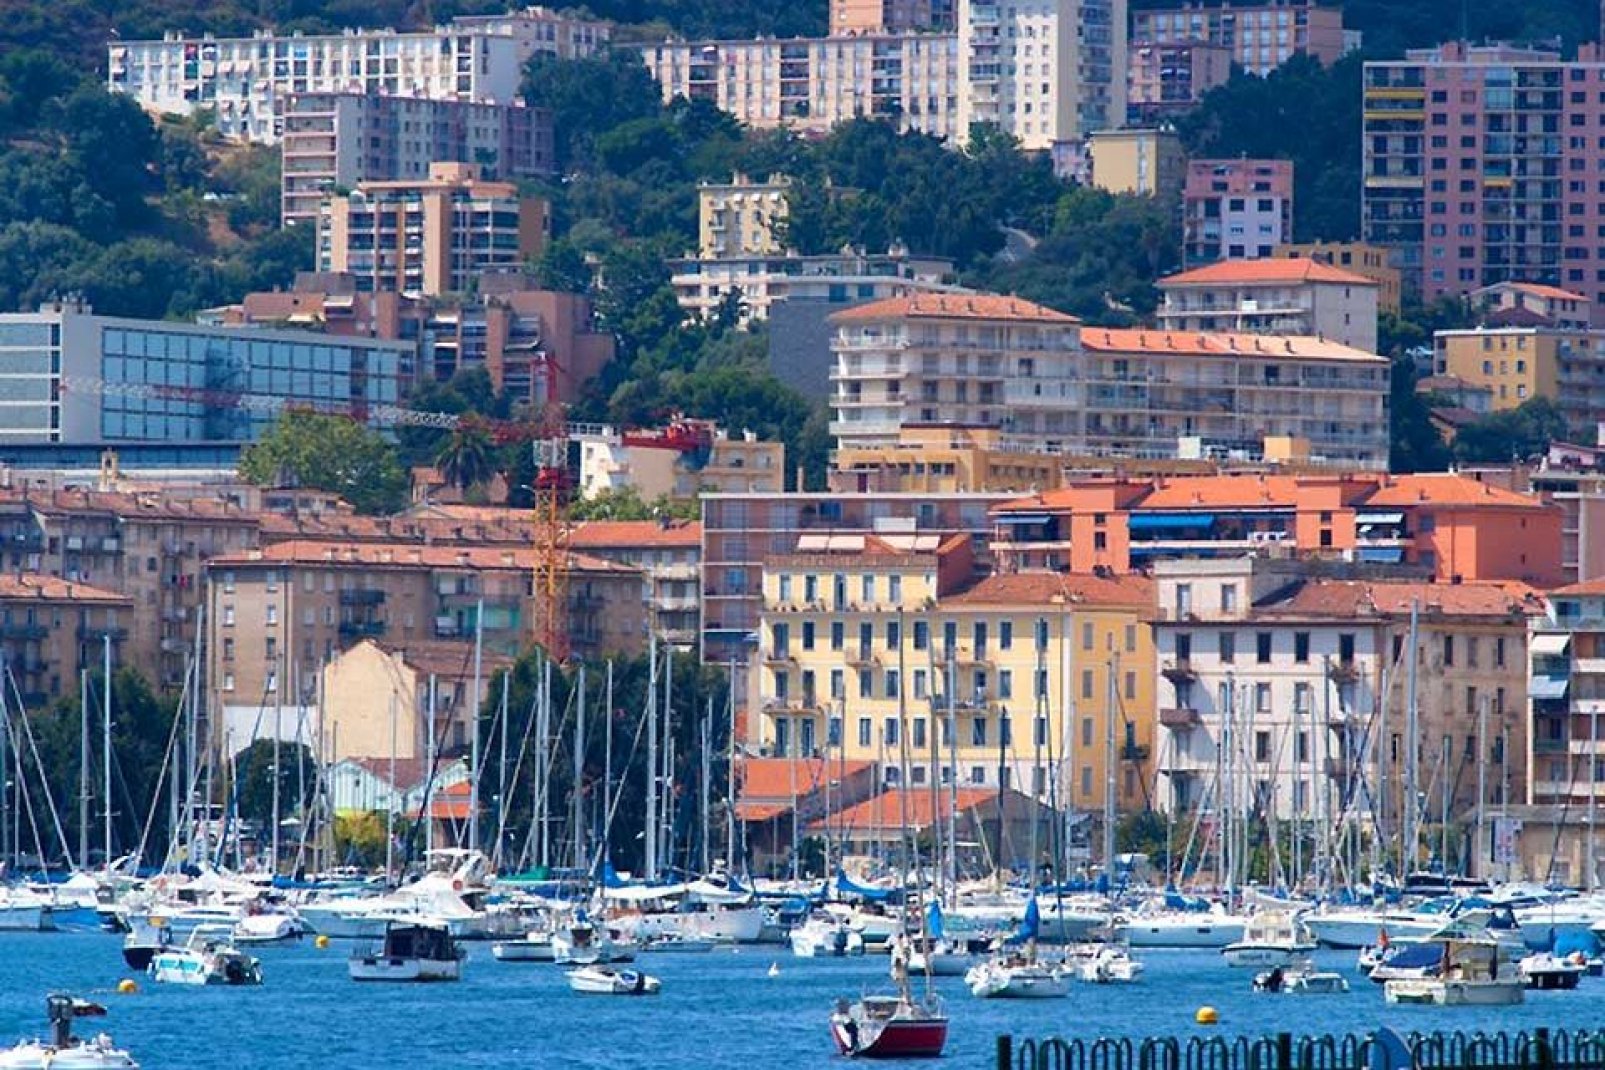 Only a small part of Ajaccio is urbanised and the rest is very scarcely populated, remaining untouched.